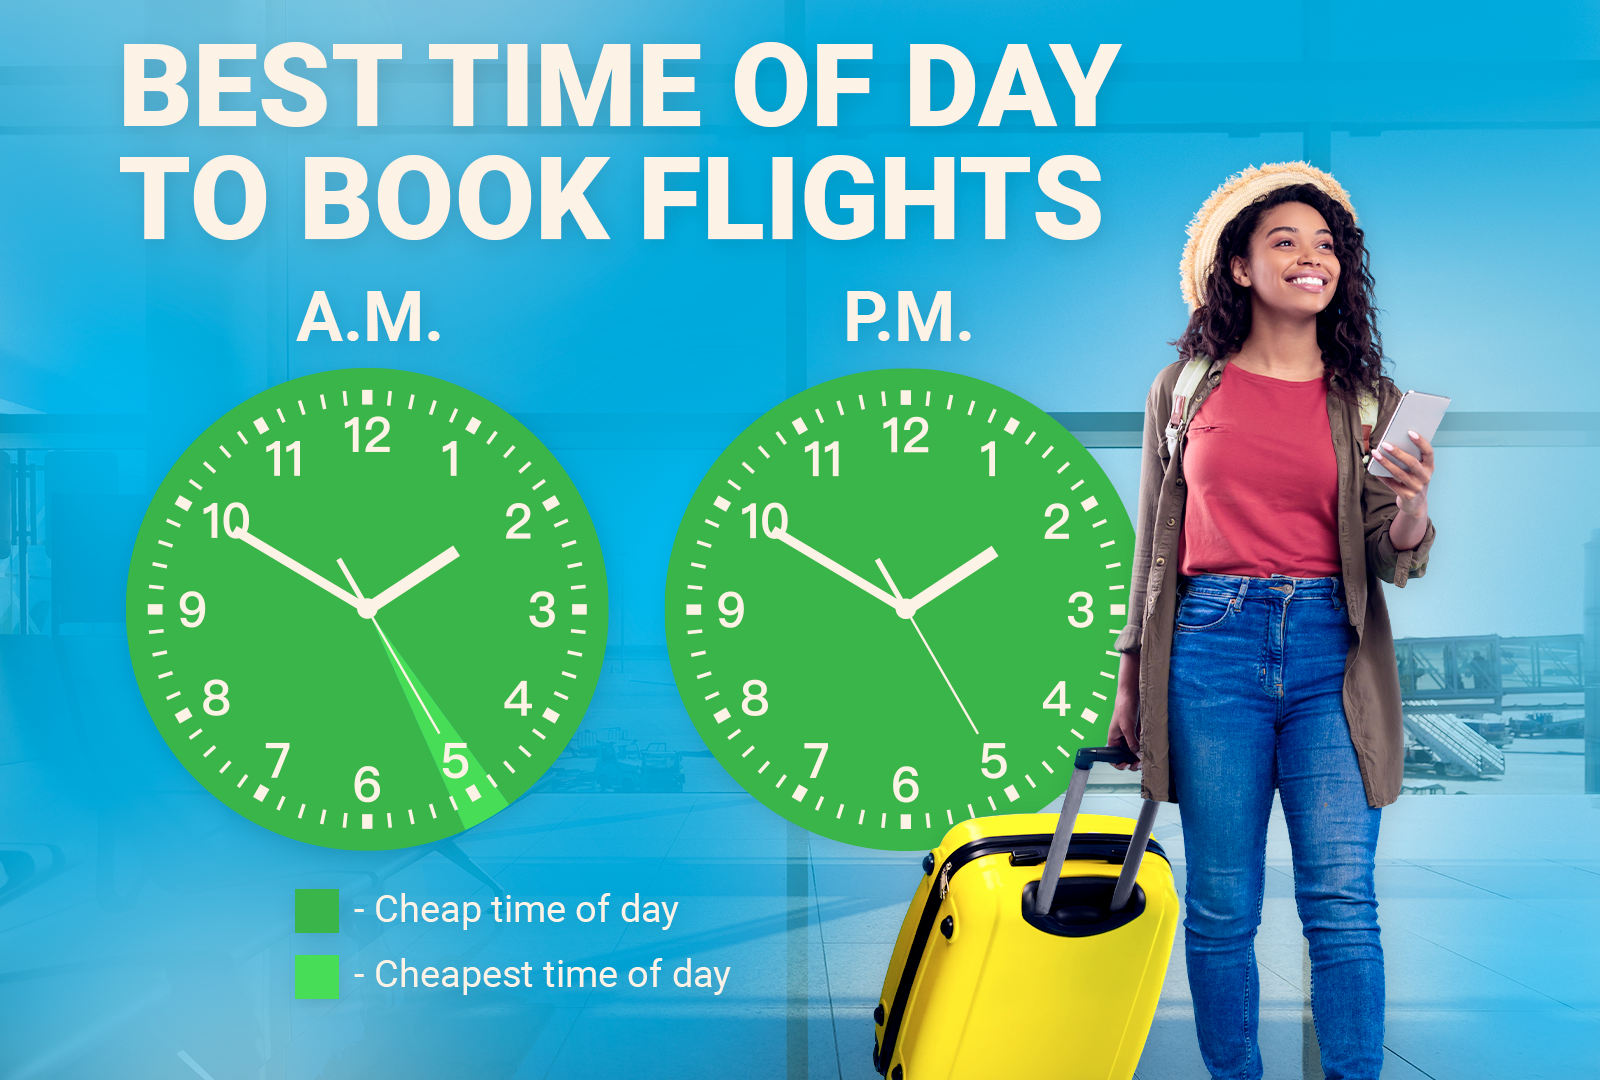 What’s the Best Time of Day to Book Flights